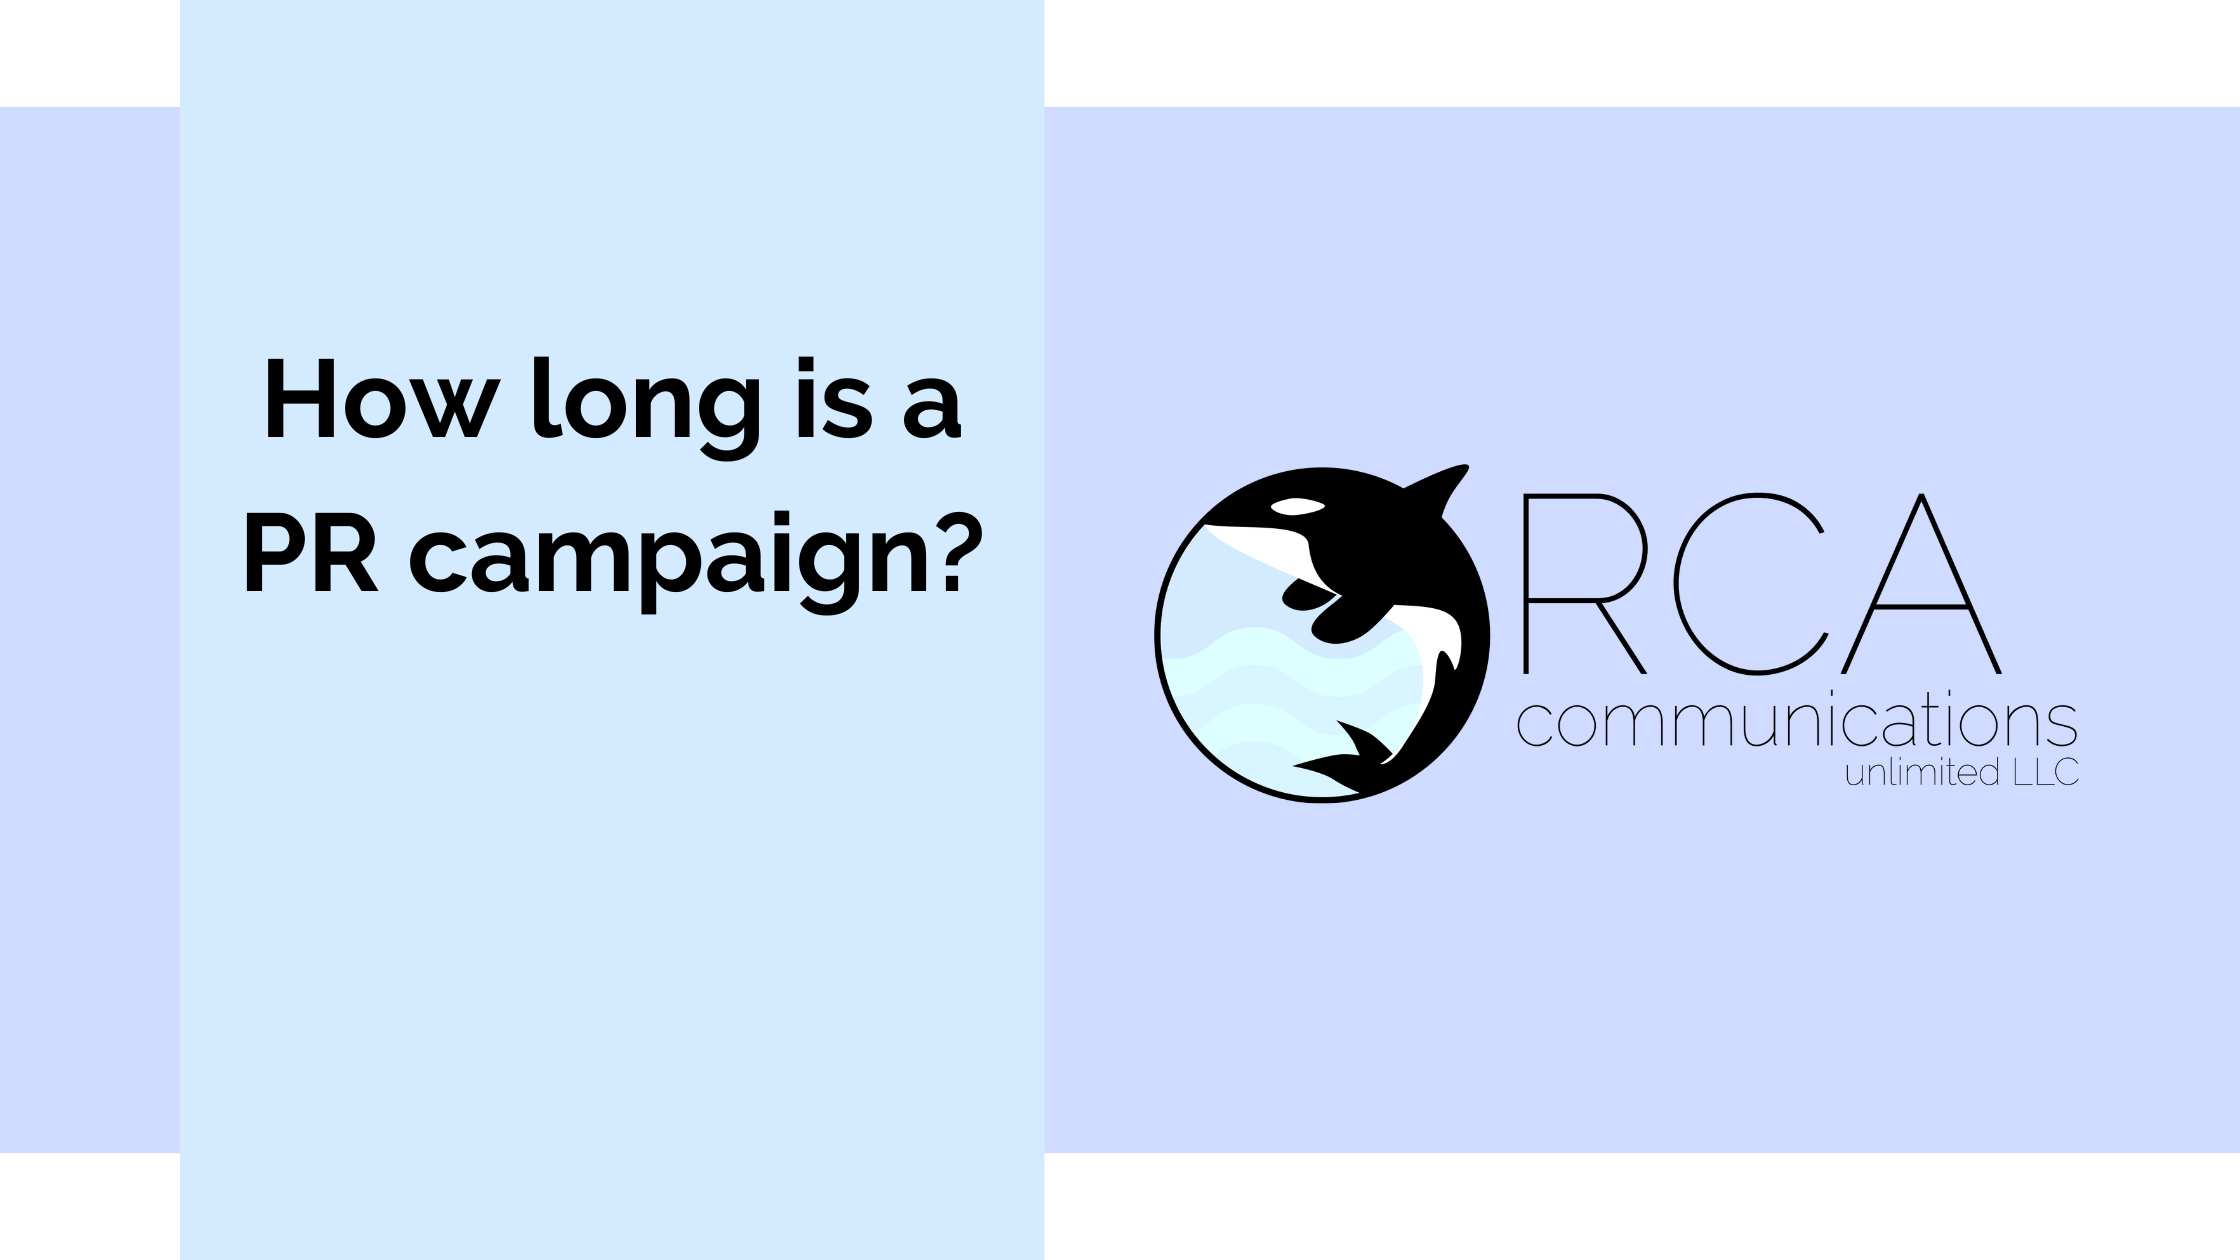 How long is a PR campaign